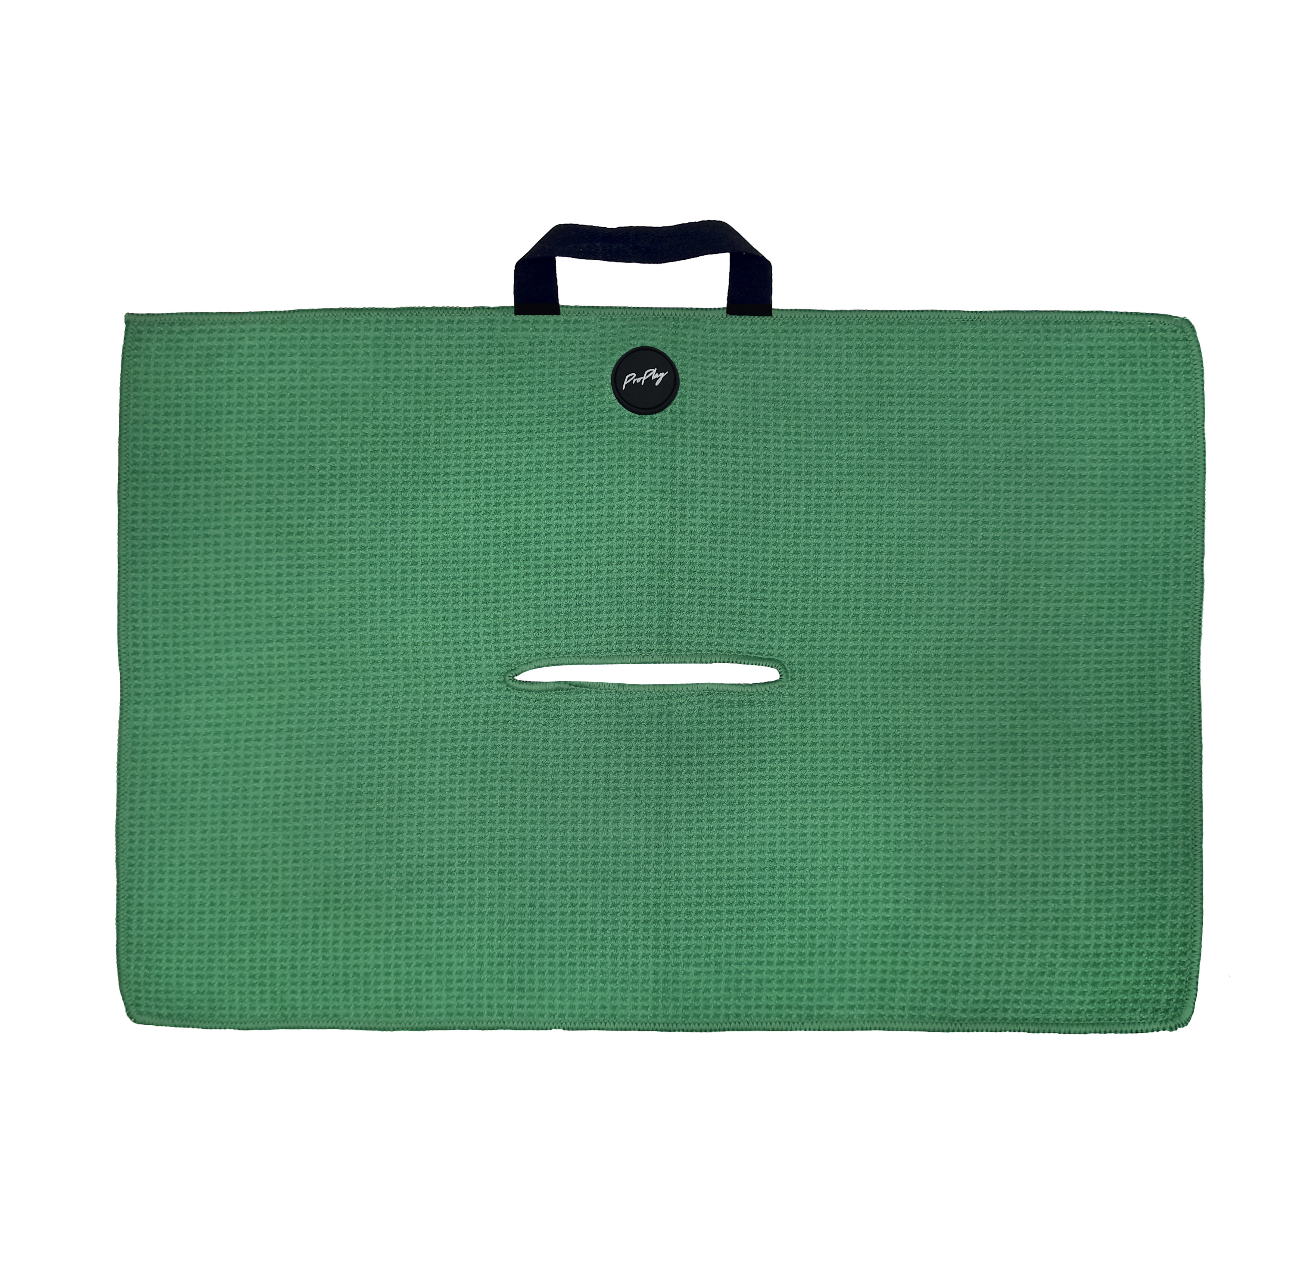 ProPlay Magnetic Towel with Center Cut and Loop Attachment